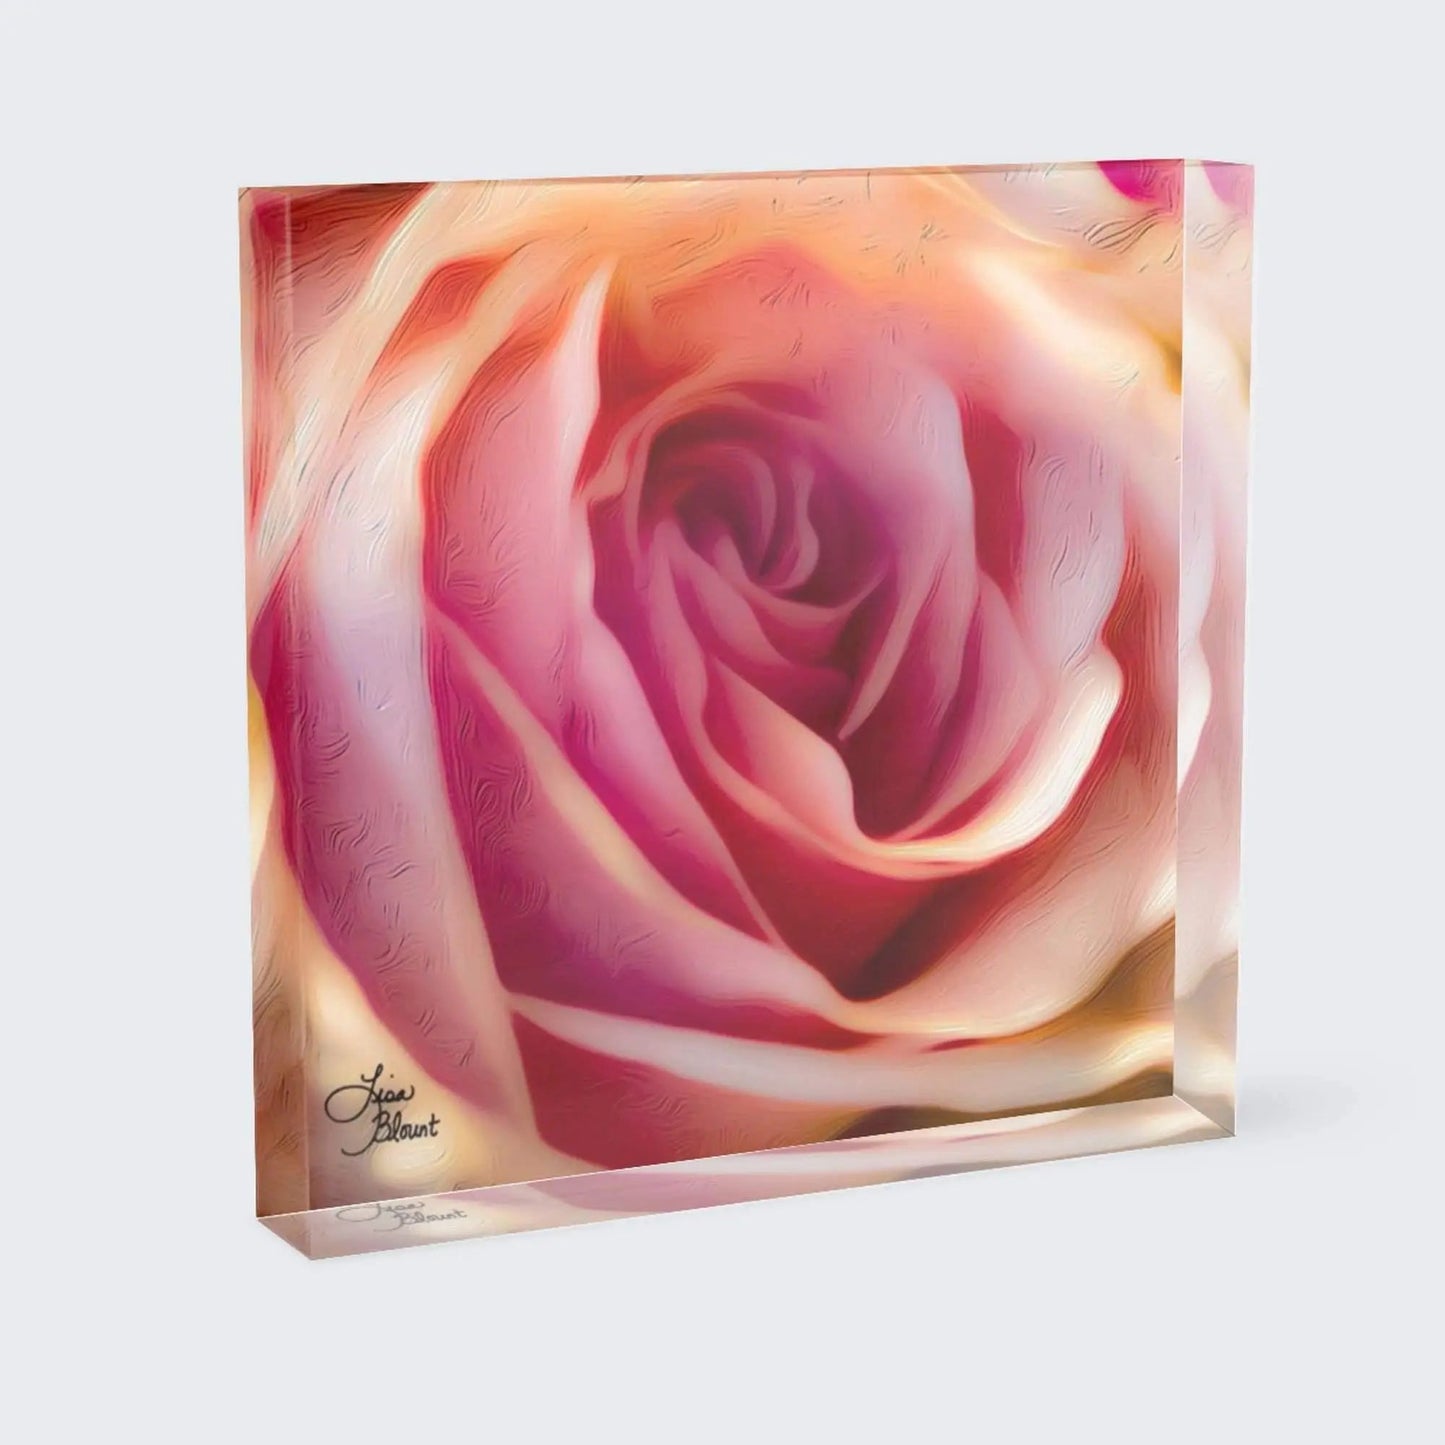 Acrylic block art of an abstract pink rose